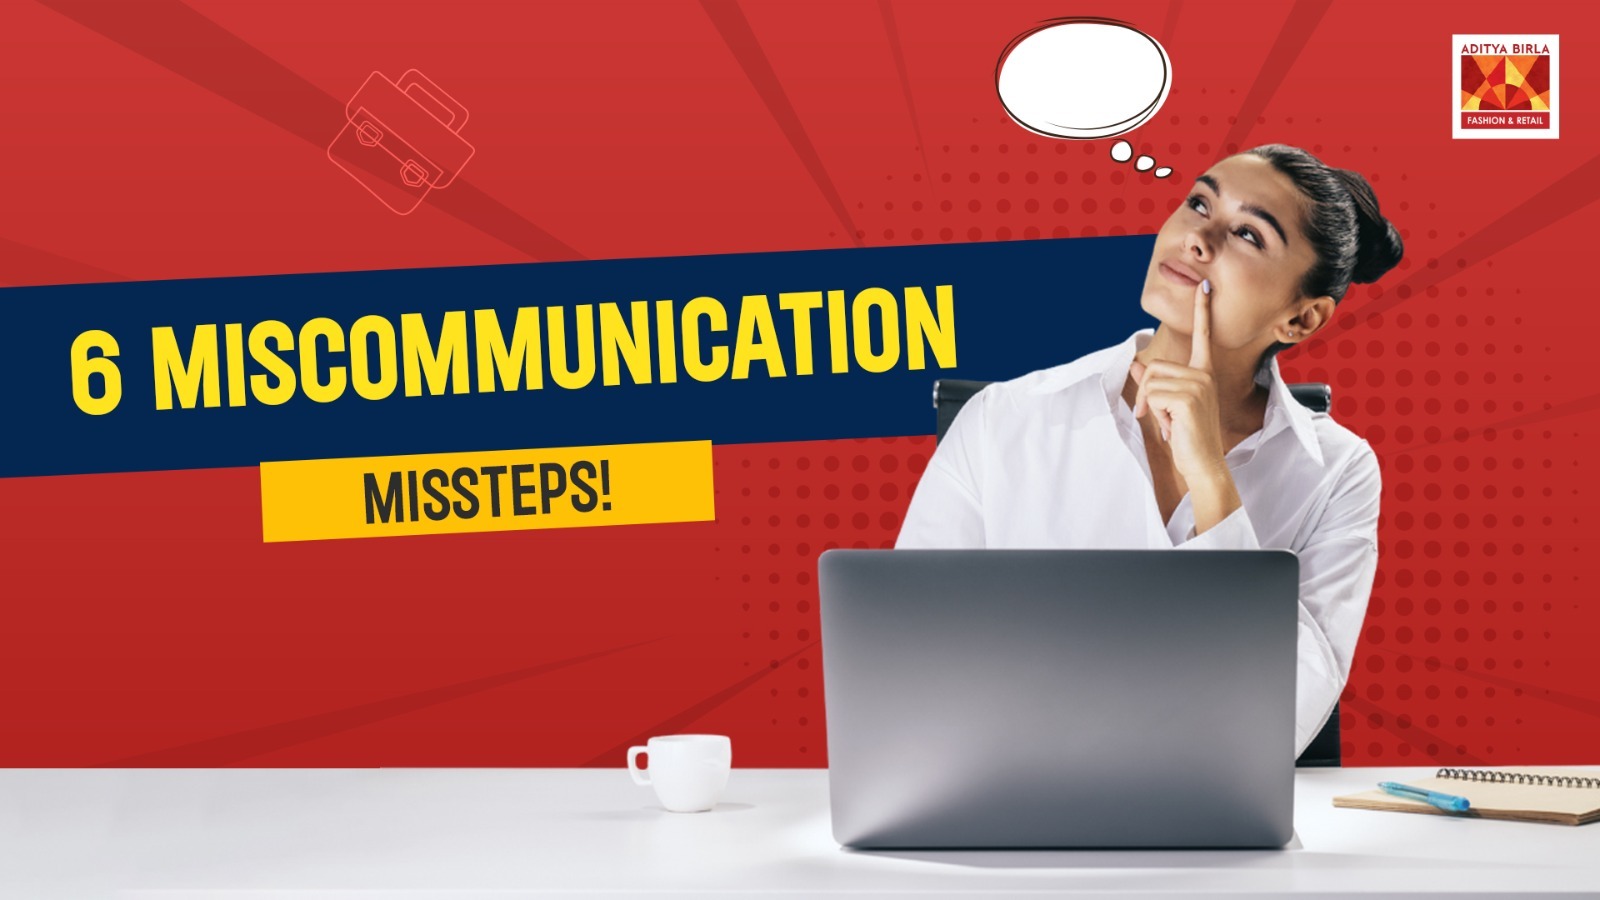 6 reasons for Workplace Miscommunication